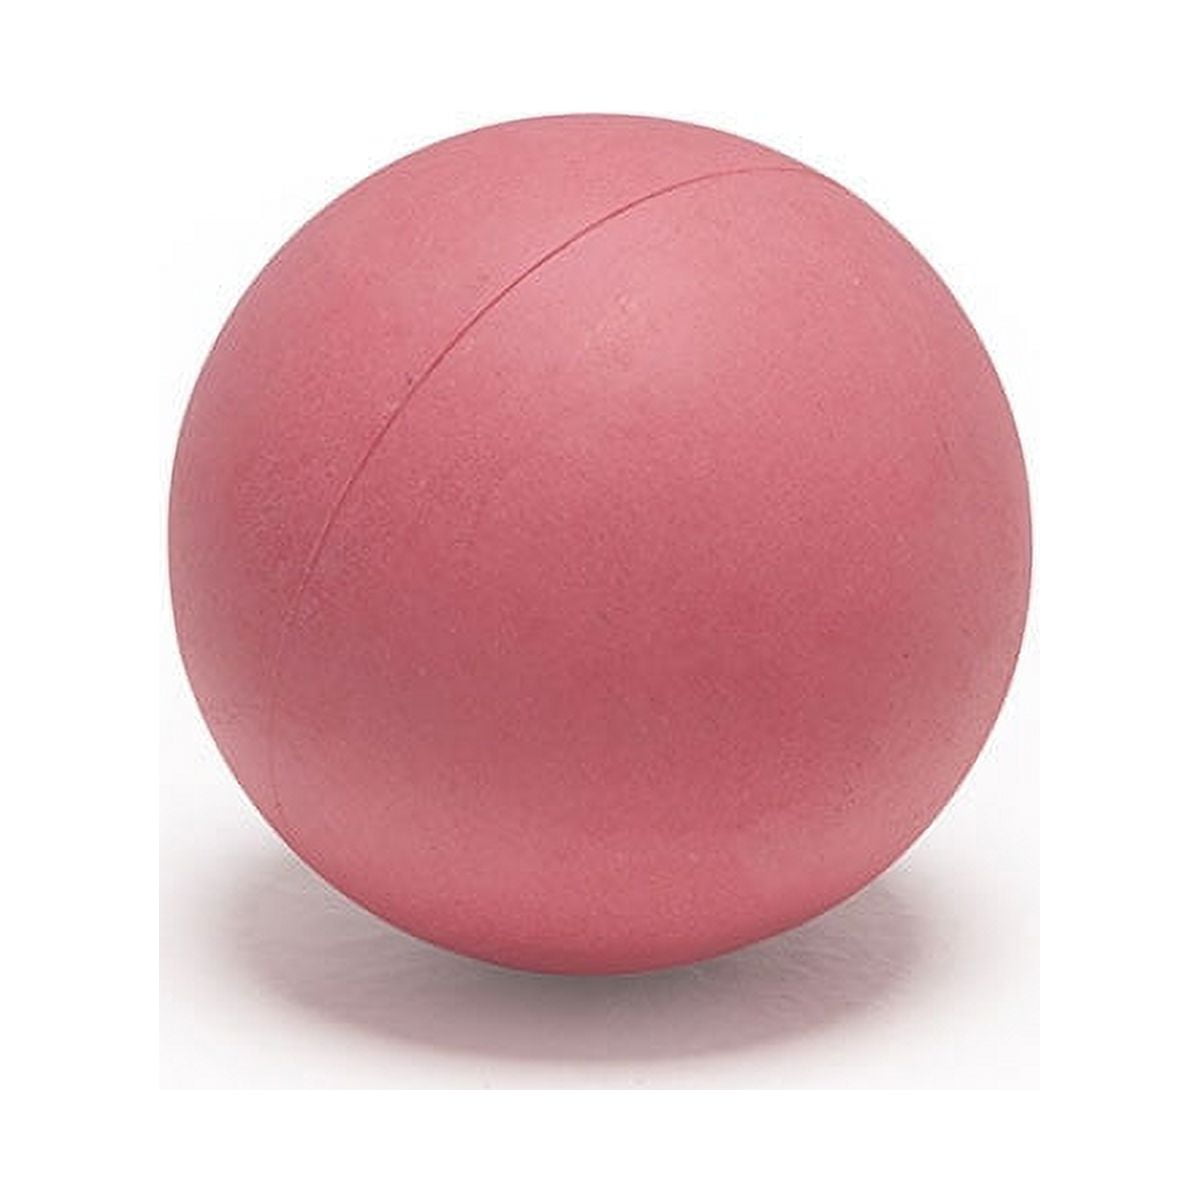 Picture of Champion Sports PLP Sponge Lacrosse Ball, Pink - Pack of 12